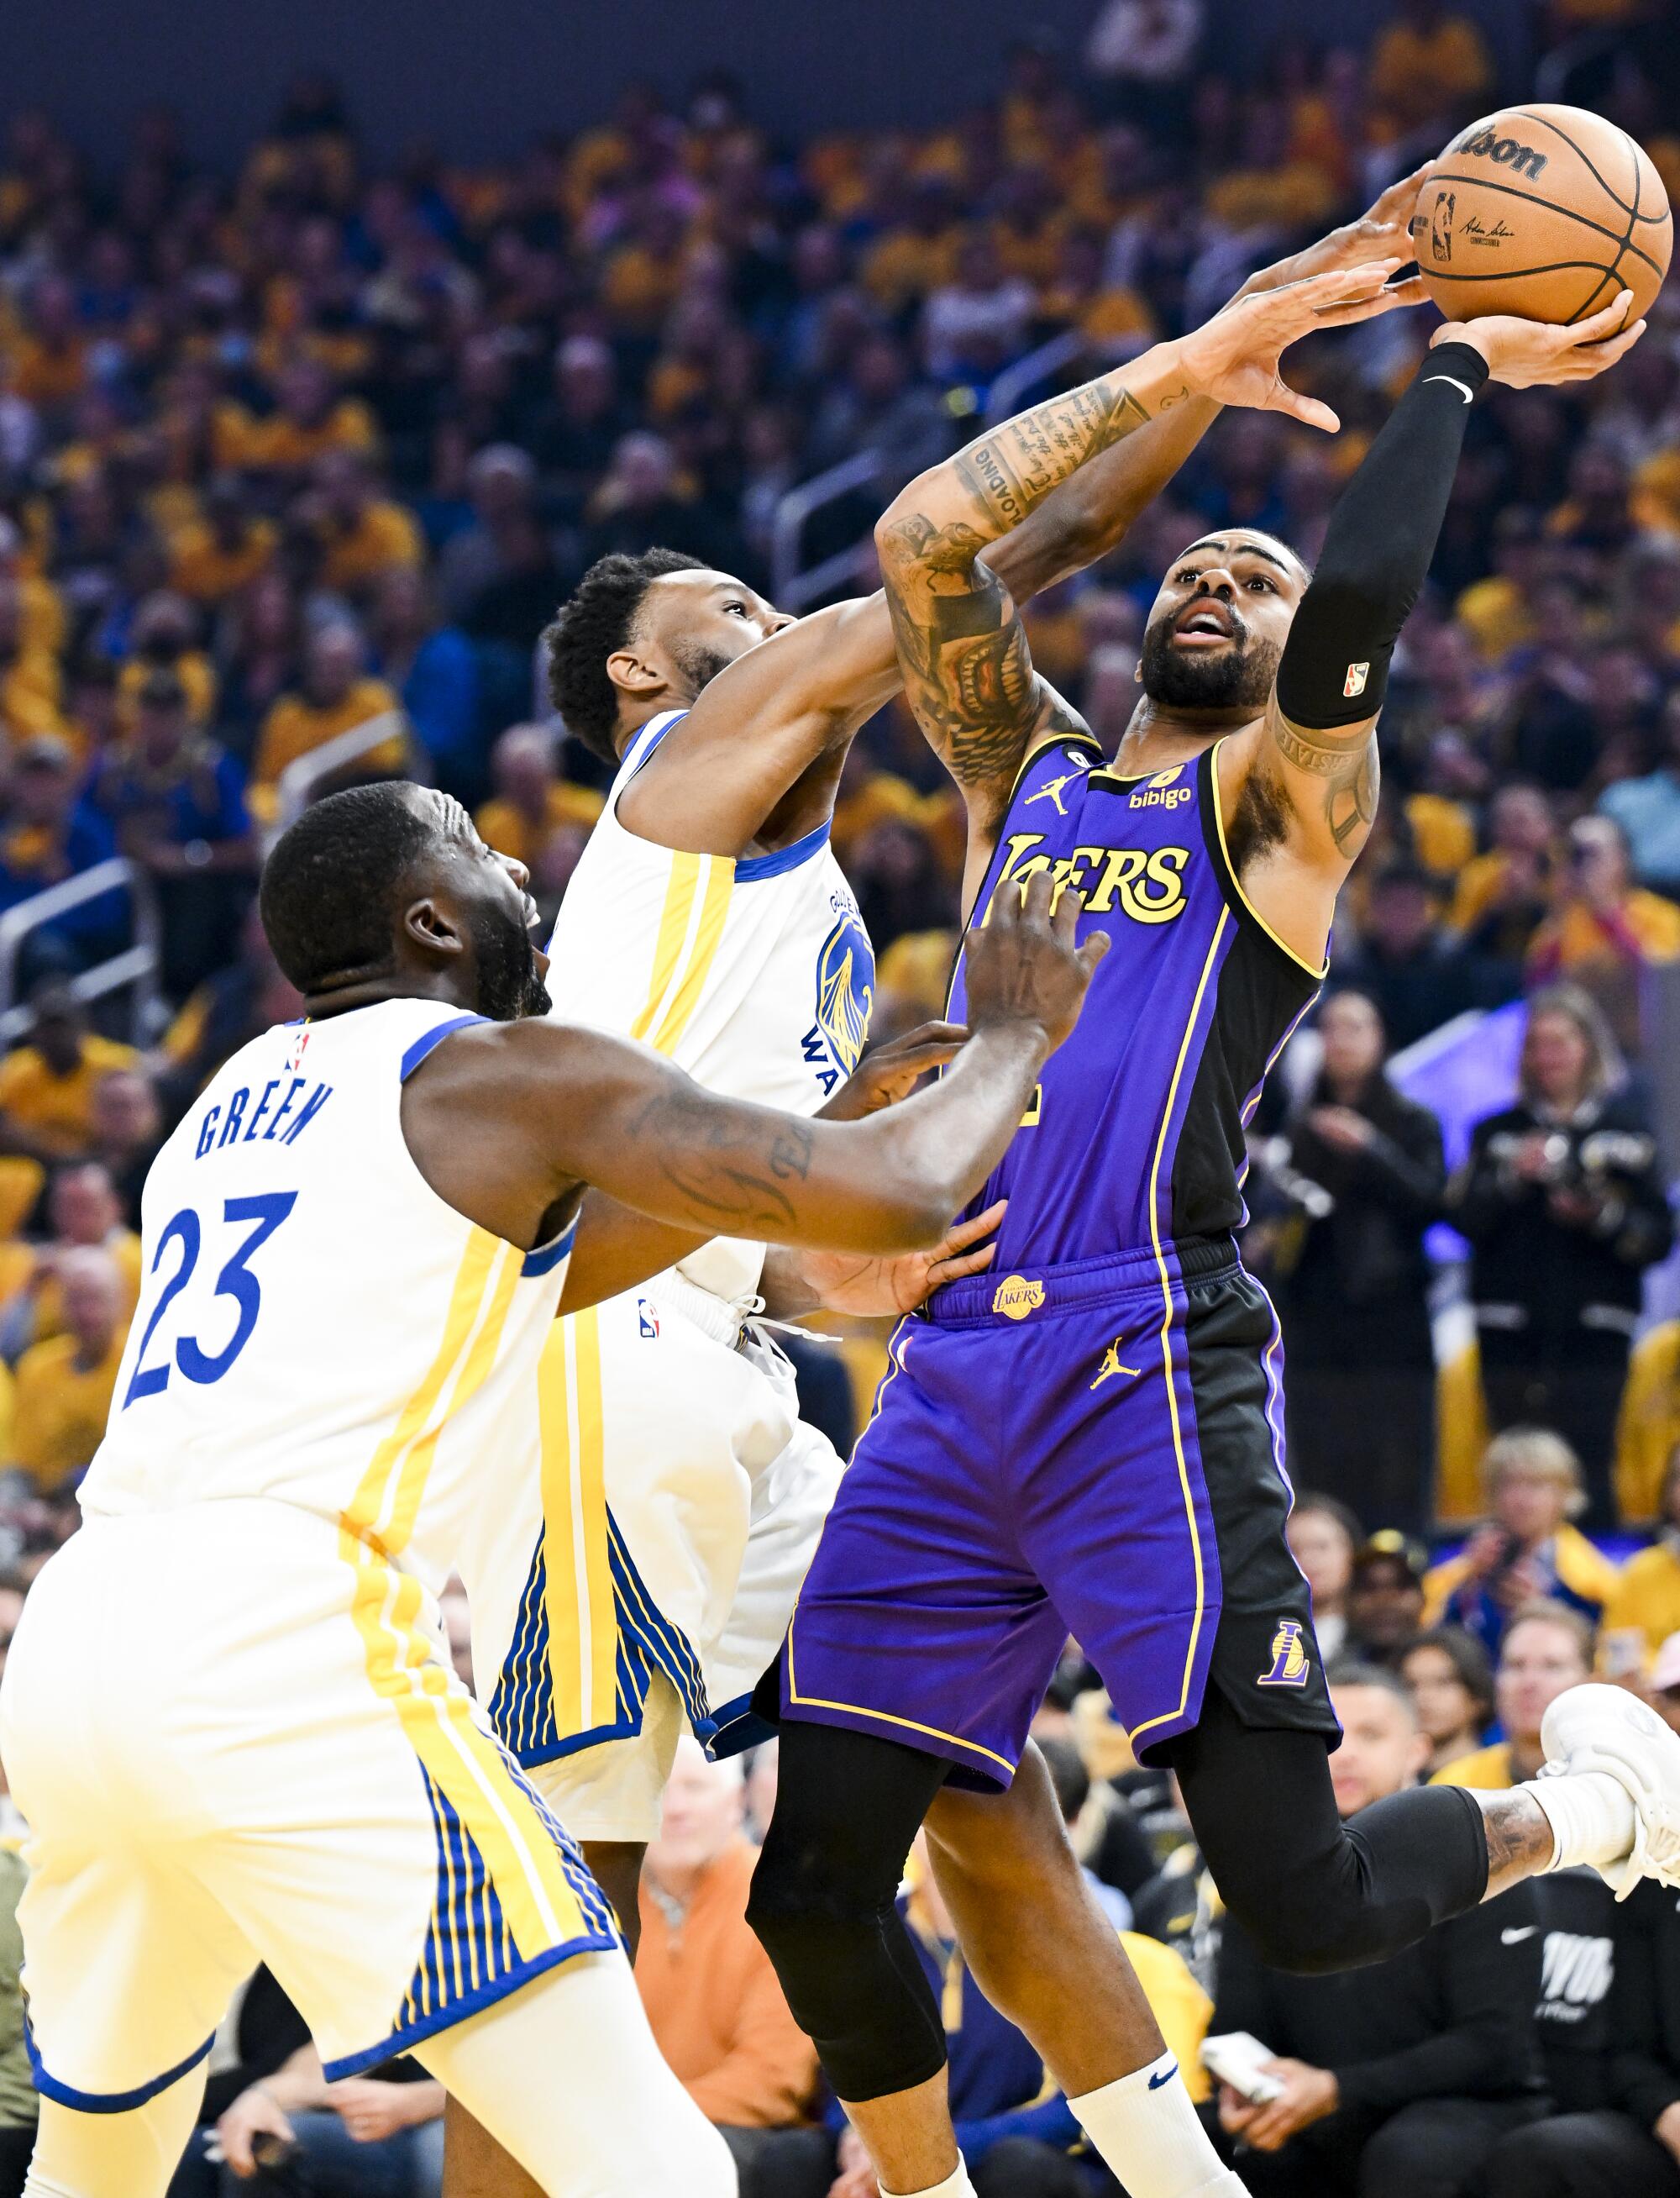 Lakers guard D'Angelo Russell goes up for a shot while pressured by Warriors forward Andrew Wiggins during the first half.